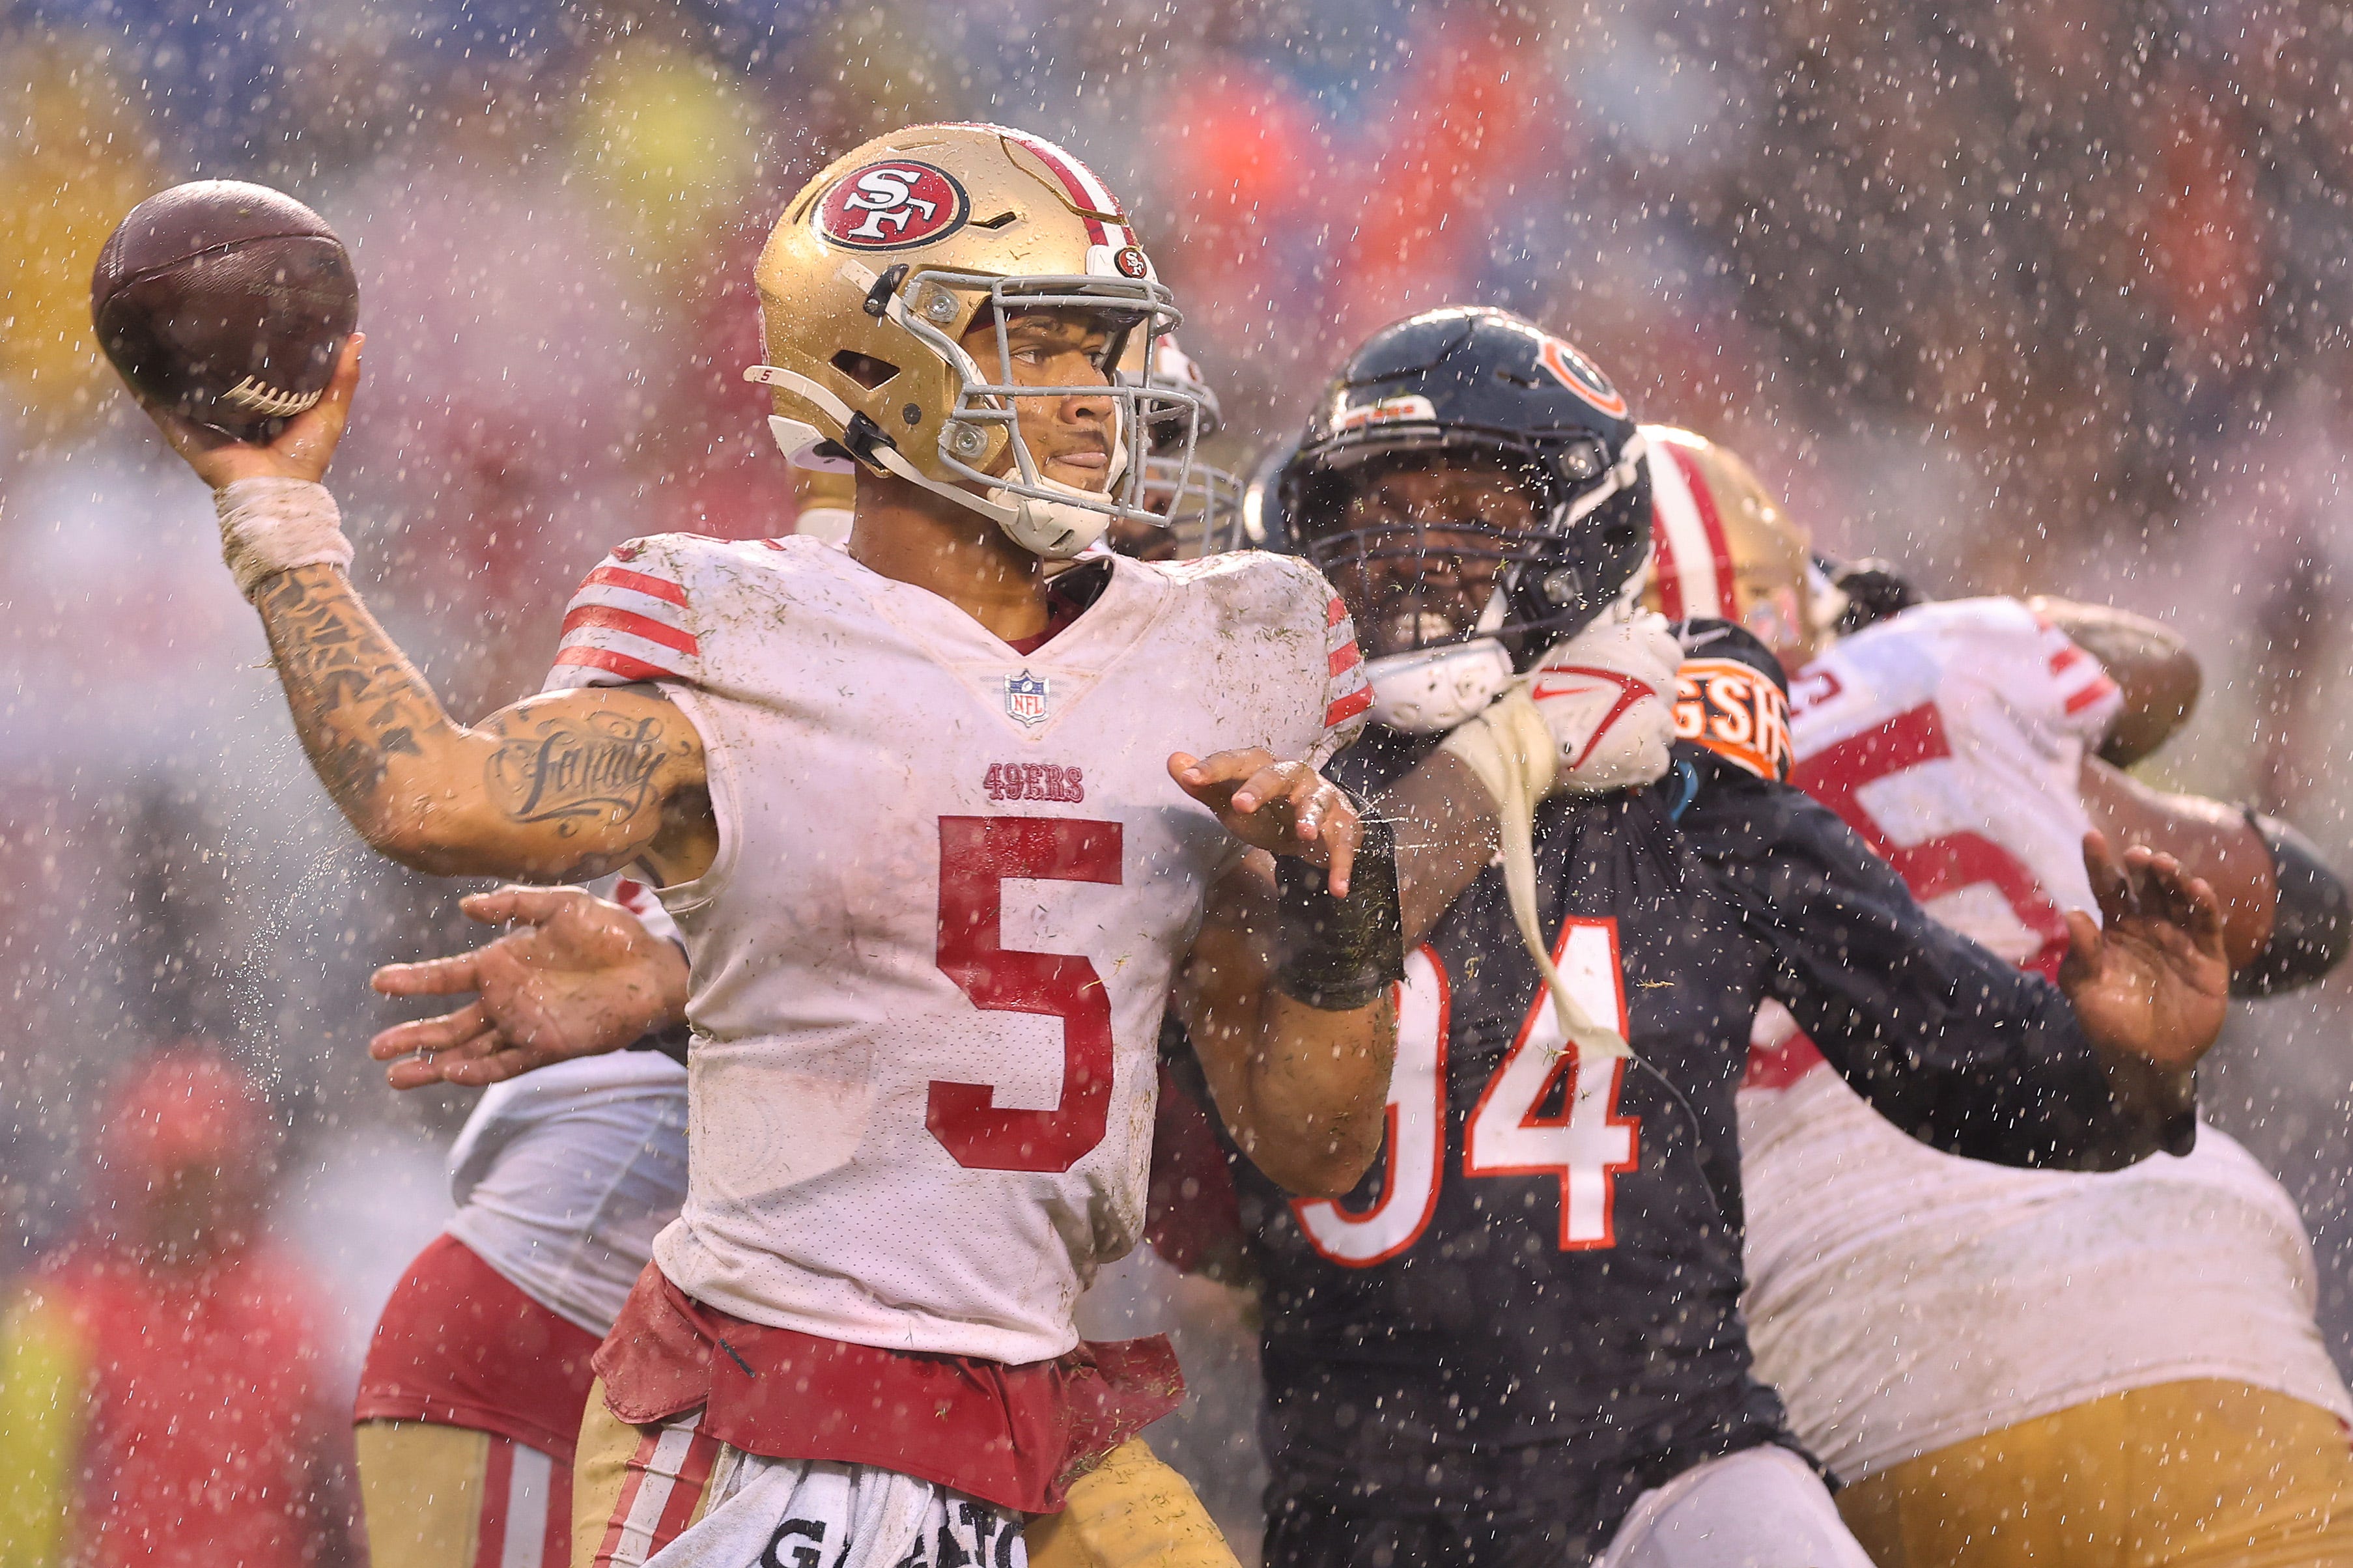 49ers' Jimmy Garoppolo Says He Took 'Questionable Hits' From